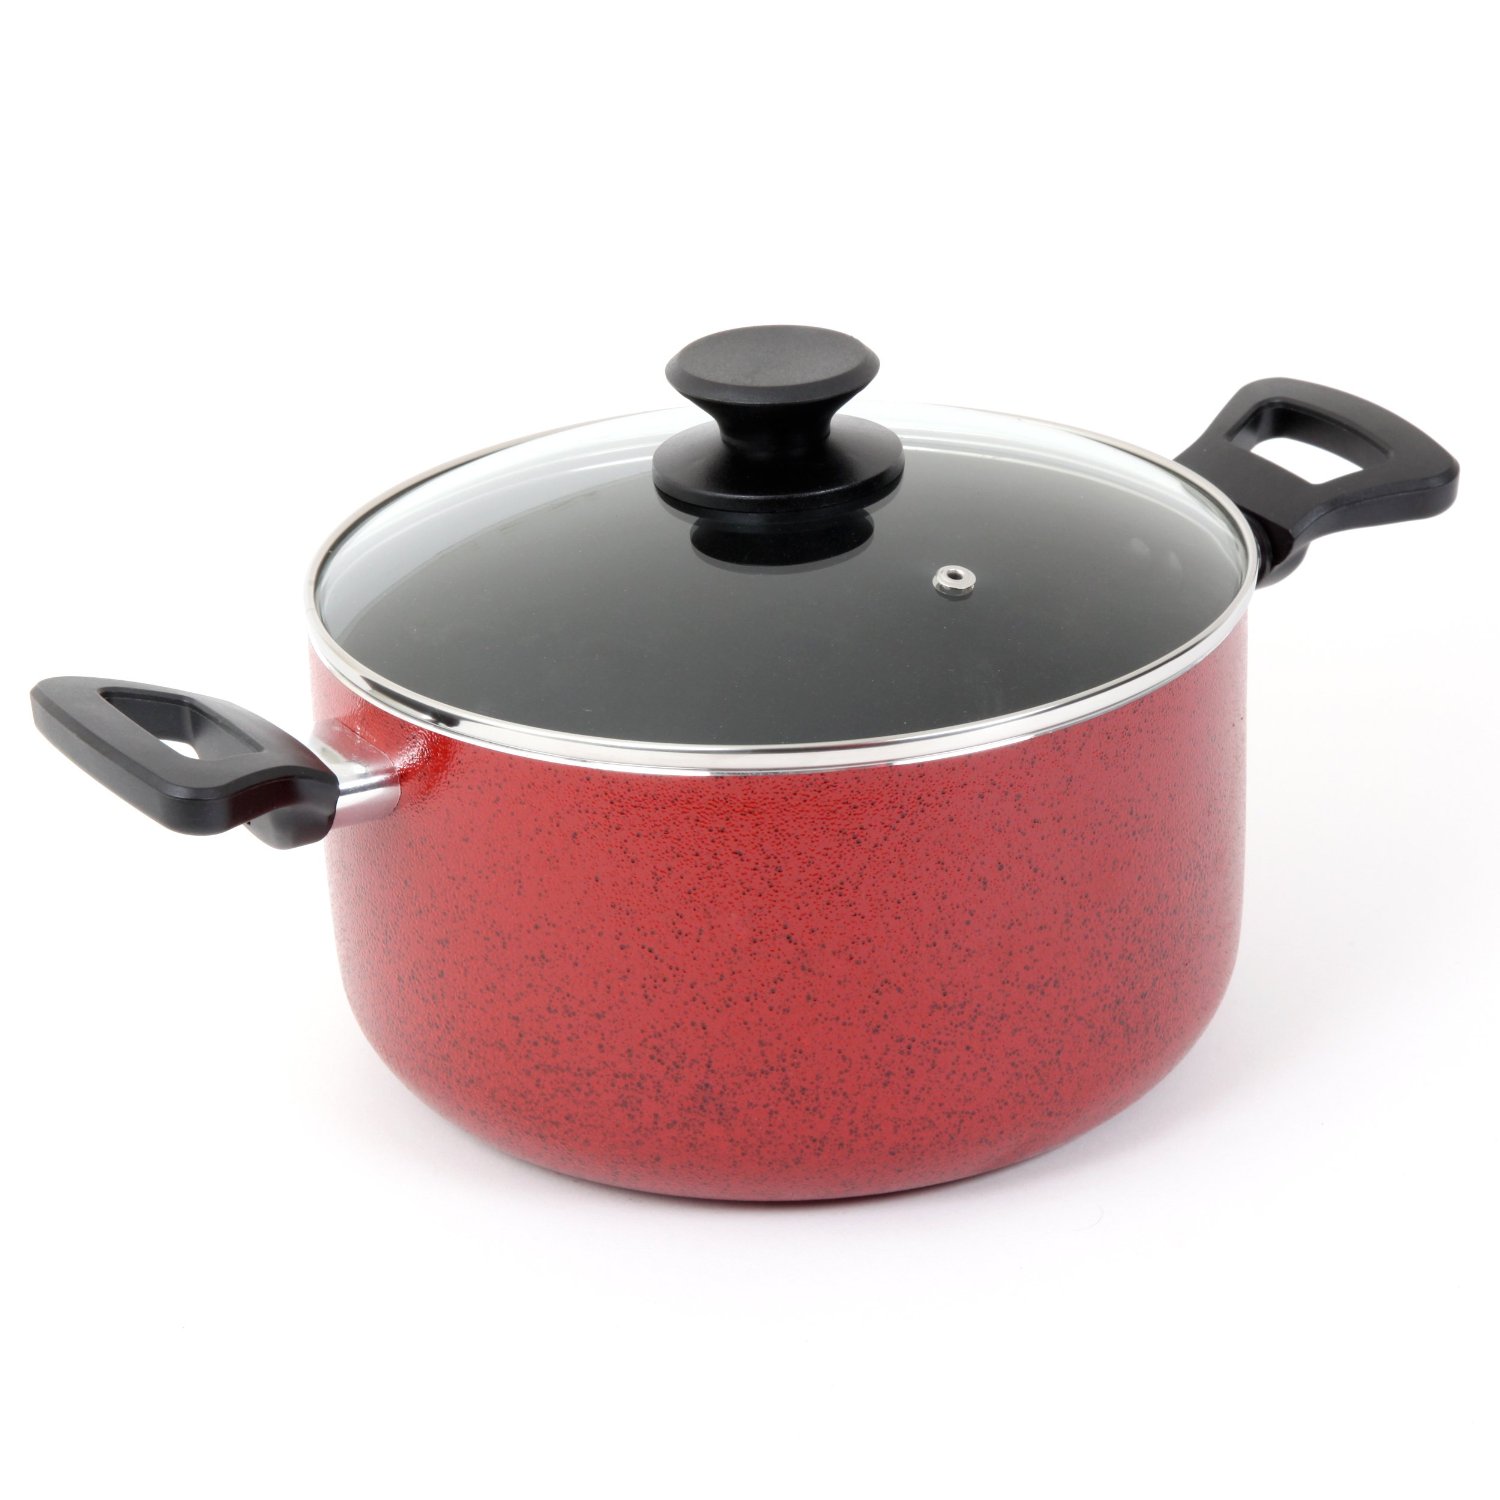 Oster 91116.02 Telford Covered Dutch Oven, 6-Quart, Red